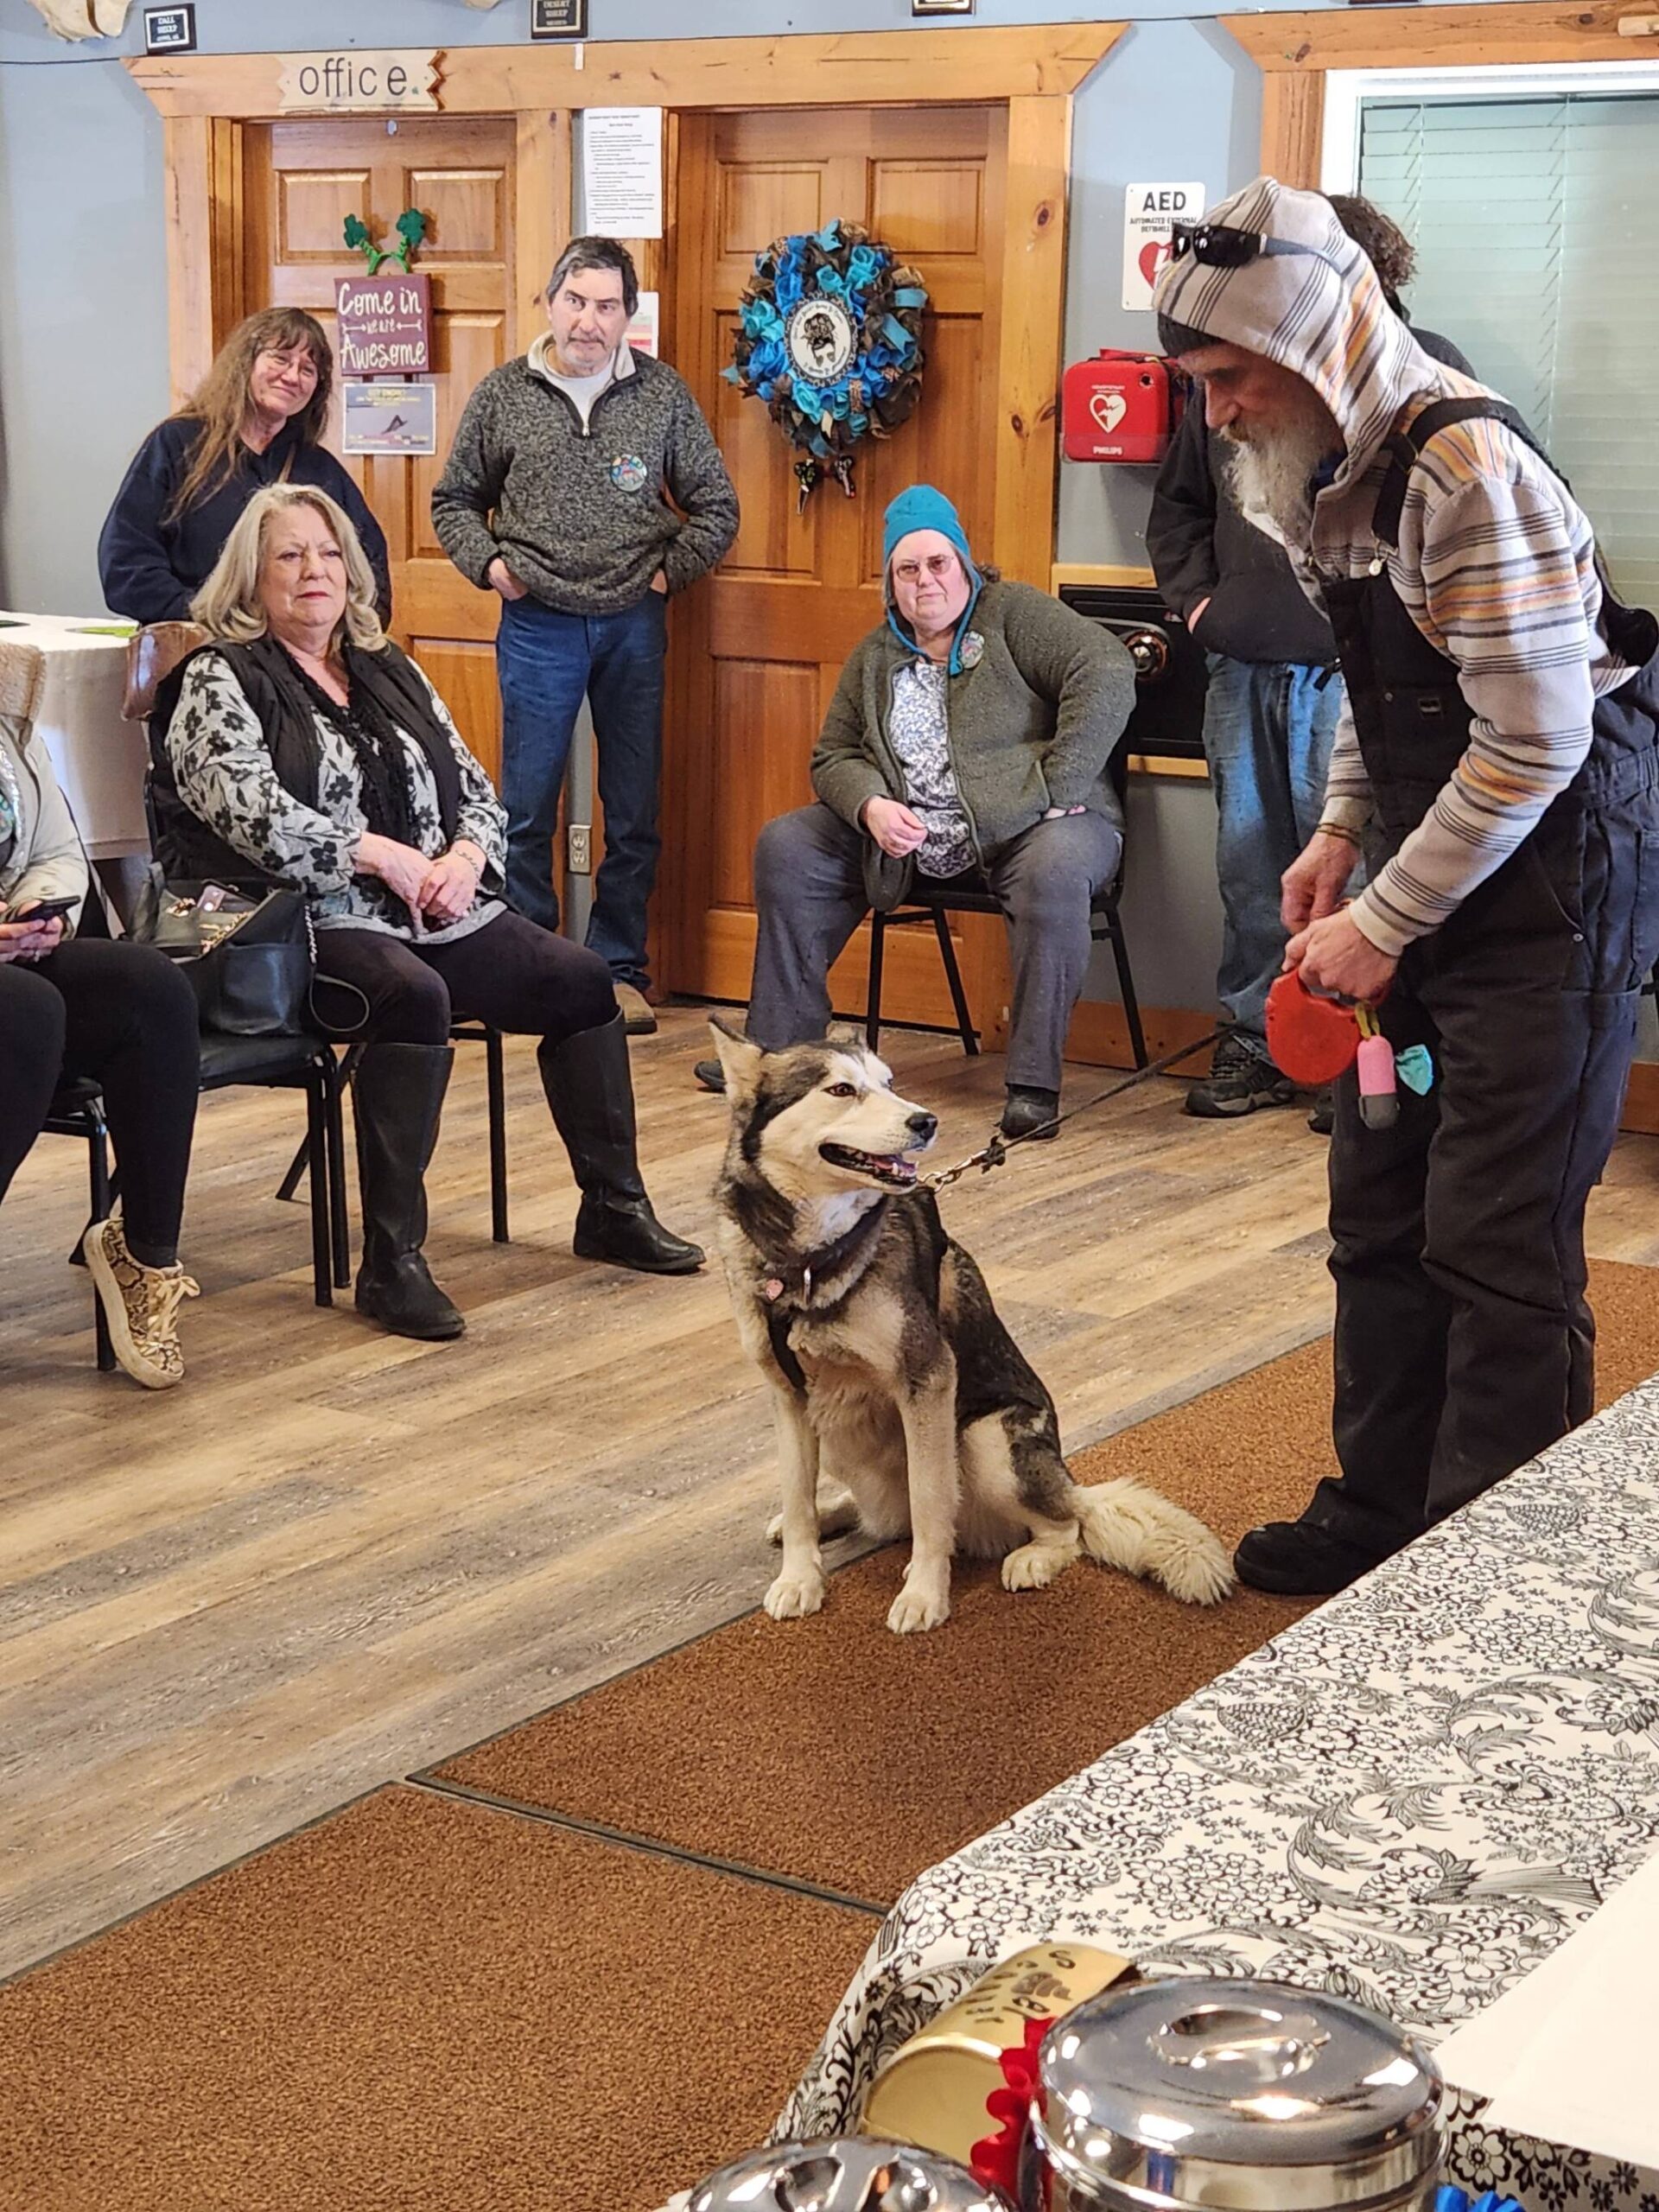 Allen Rasmussen shows his husky, Ayla, to the audience of the Snow Rondi dog show on Sunday, March 5 at the Anchor Point Senior Center in Anchor Point, Alaska. Ayla won an award for being the “dog that looks most like their owner.” Photo courtesy of Debbie Car